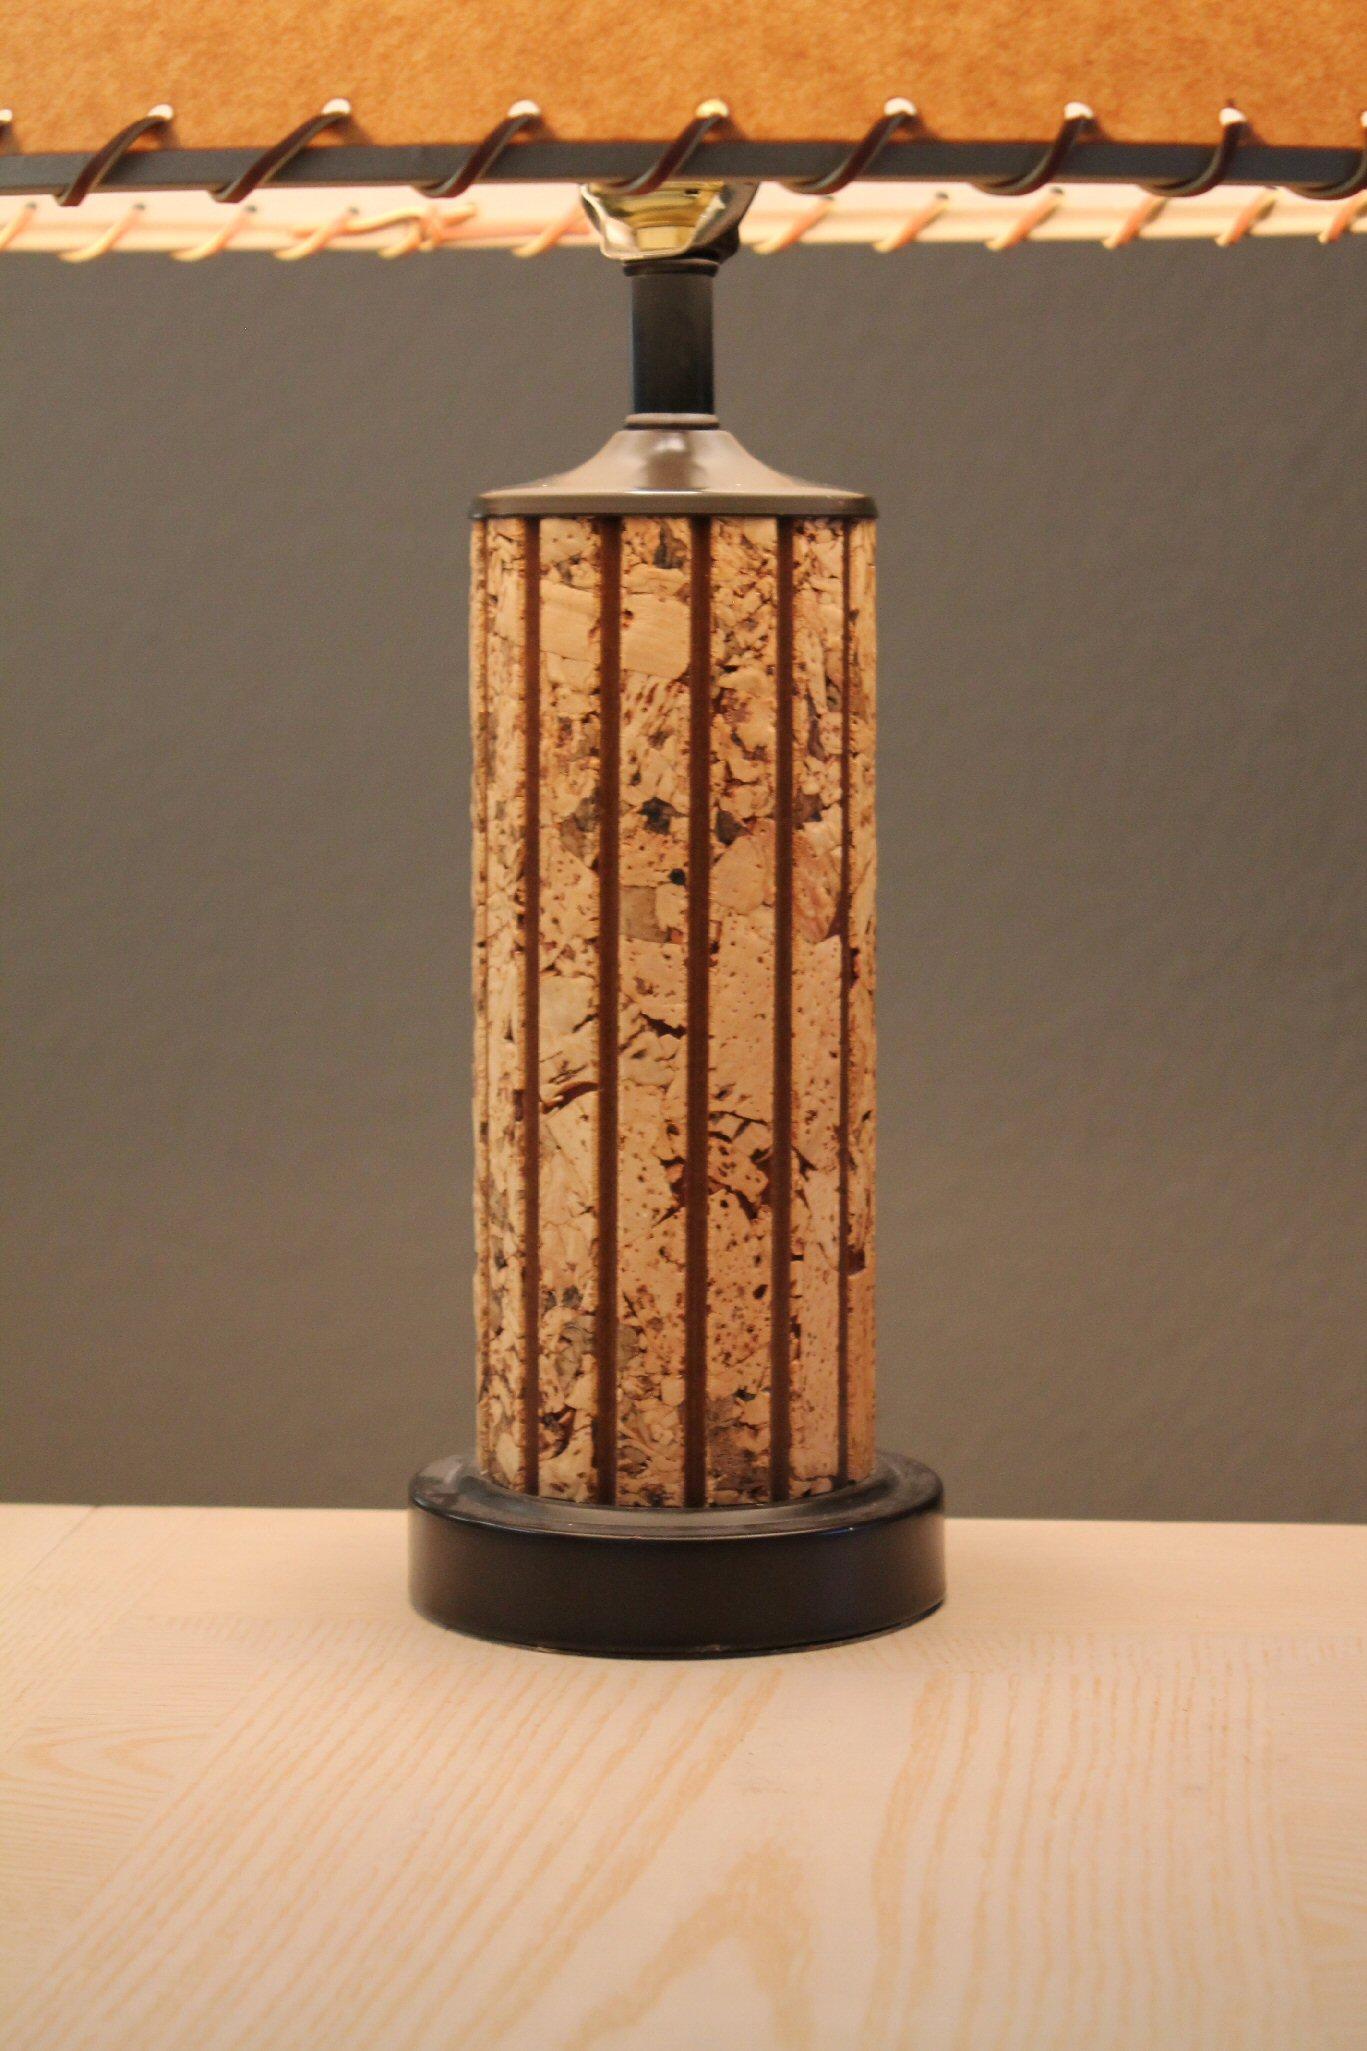 American Gorgeous Cork Mid Century Modern Table Lamp! Laced Shade 1960s Decor Lighting For Sale